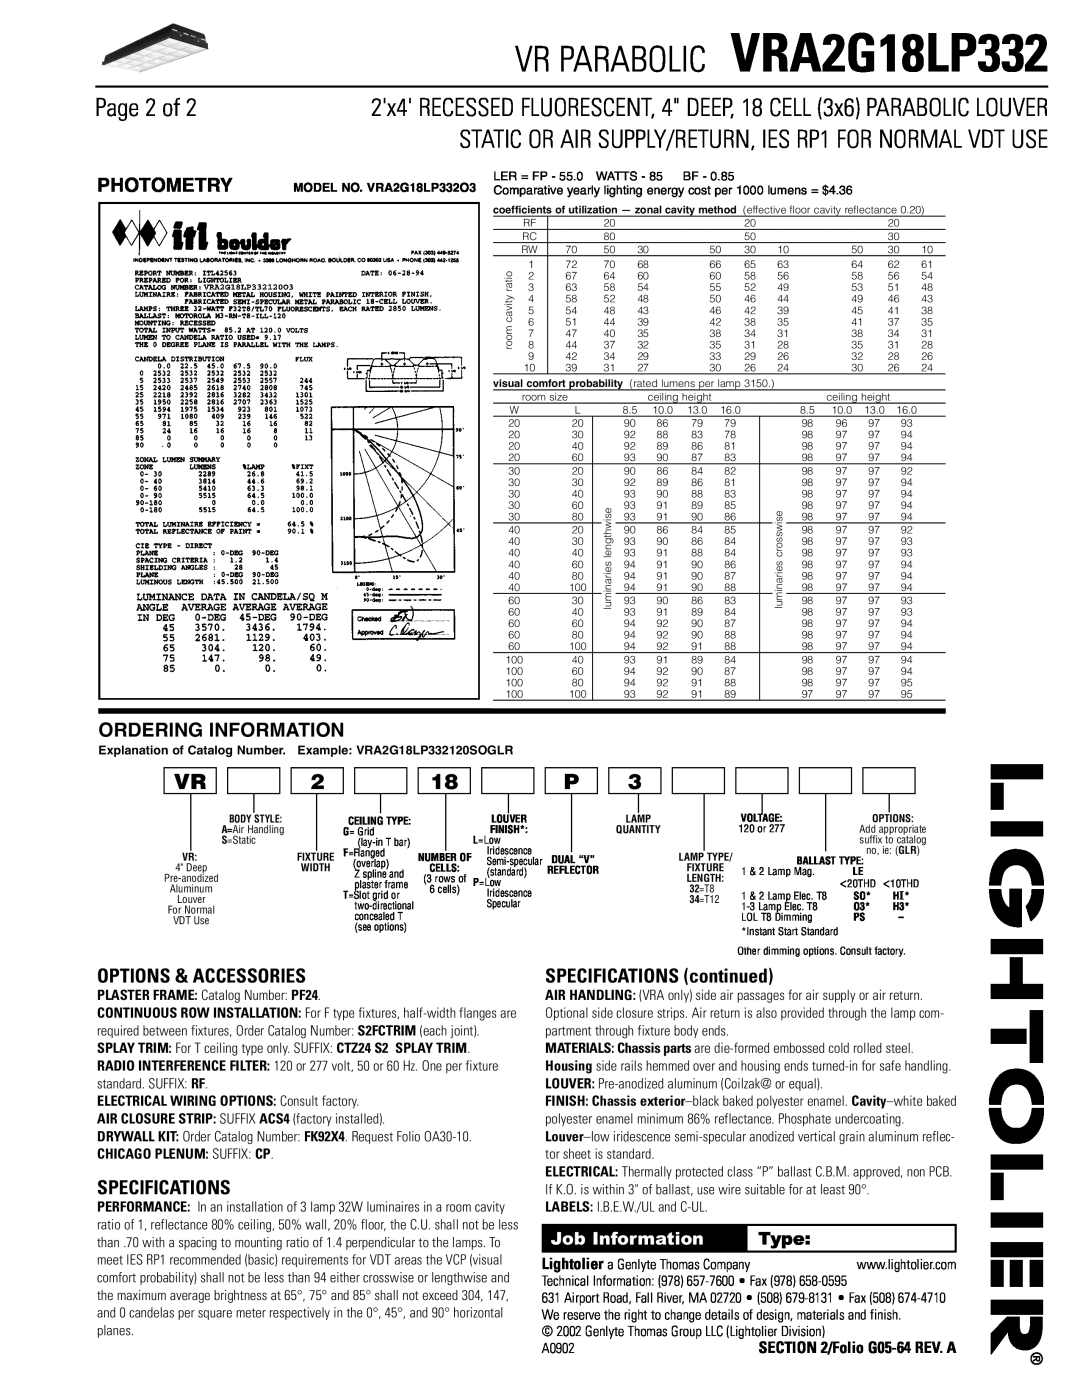 Lightolier VRA2G18LP332 Page 2 of, Options & Accessories, Specifications, SPECIFICATIONS continued, Photometry, Type 